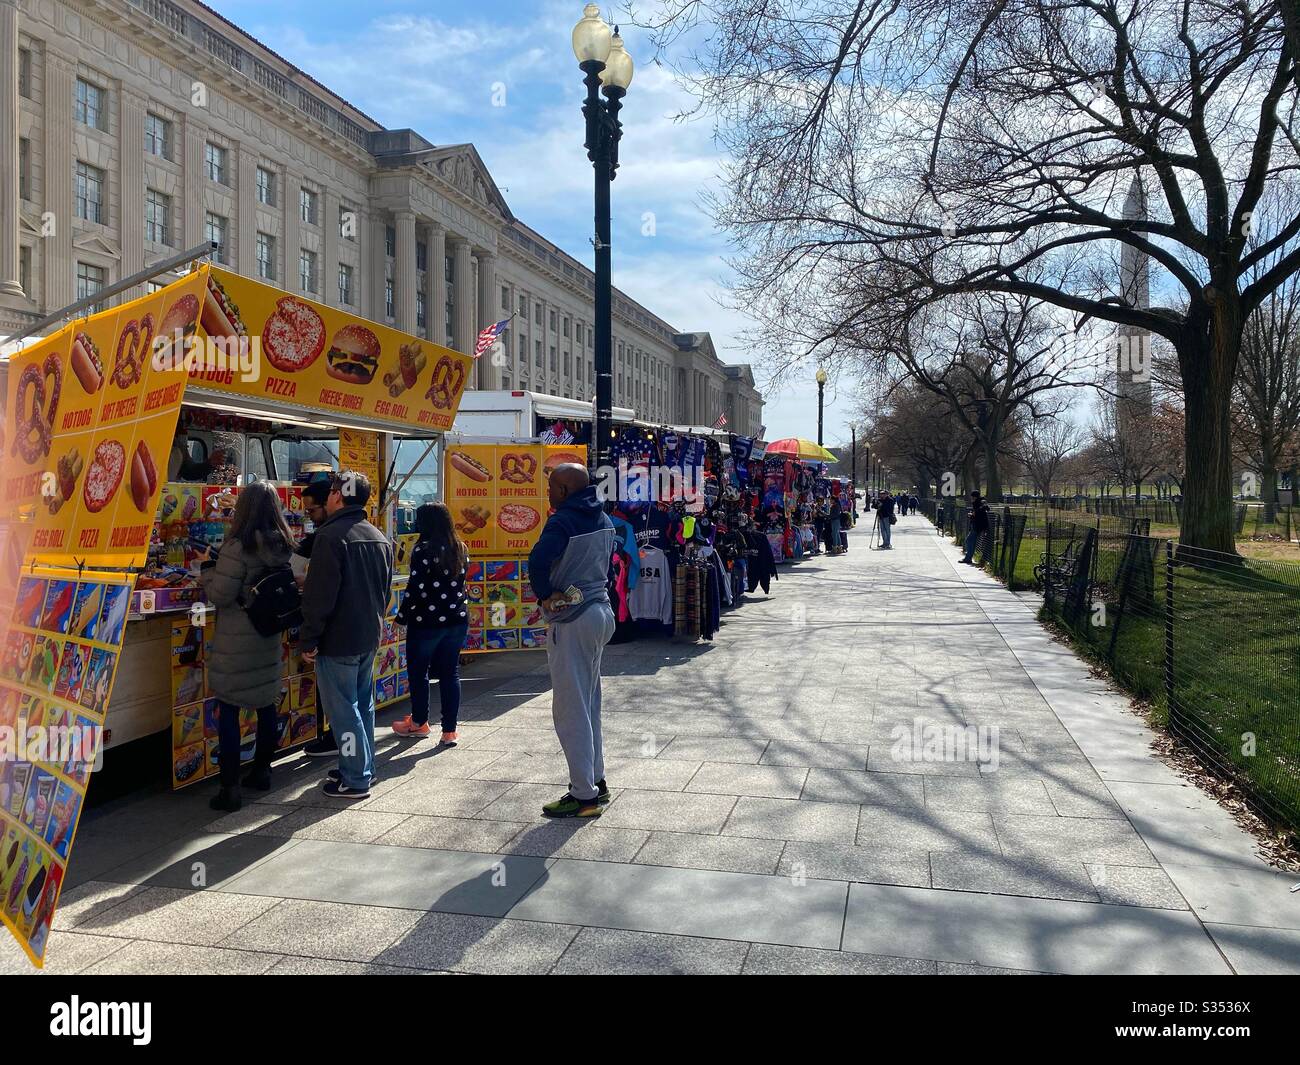 Food and Souvenir vendors lined up along the Elipse in Washington DC Stock Photo